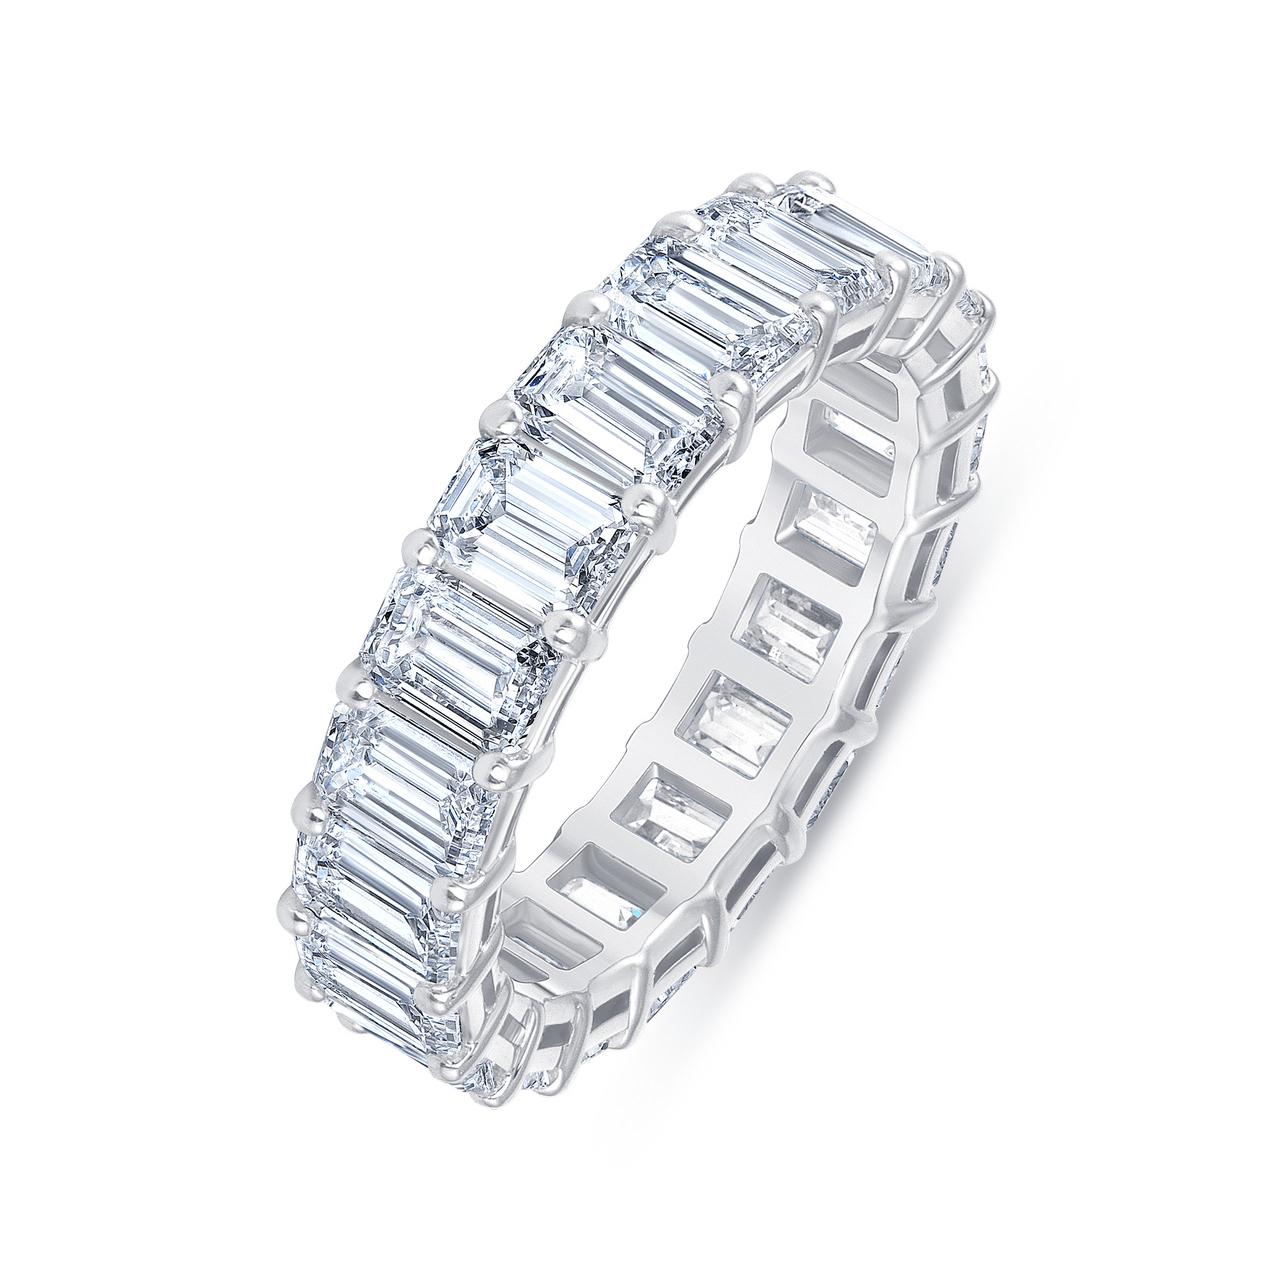 A fine and impressive 5.00 carat Eternity Diamond Ring.
The Diamond Band Ring is set with 20 Emerald Cut Diamond weighing approximately 0.25 Carat each.
The diamond color is F/G, and the quality is VS.
The band rings is made to order, which means